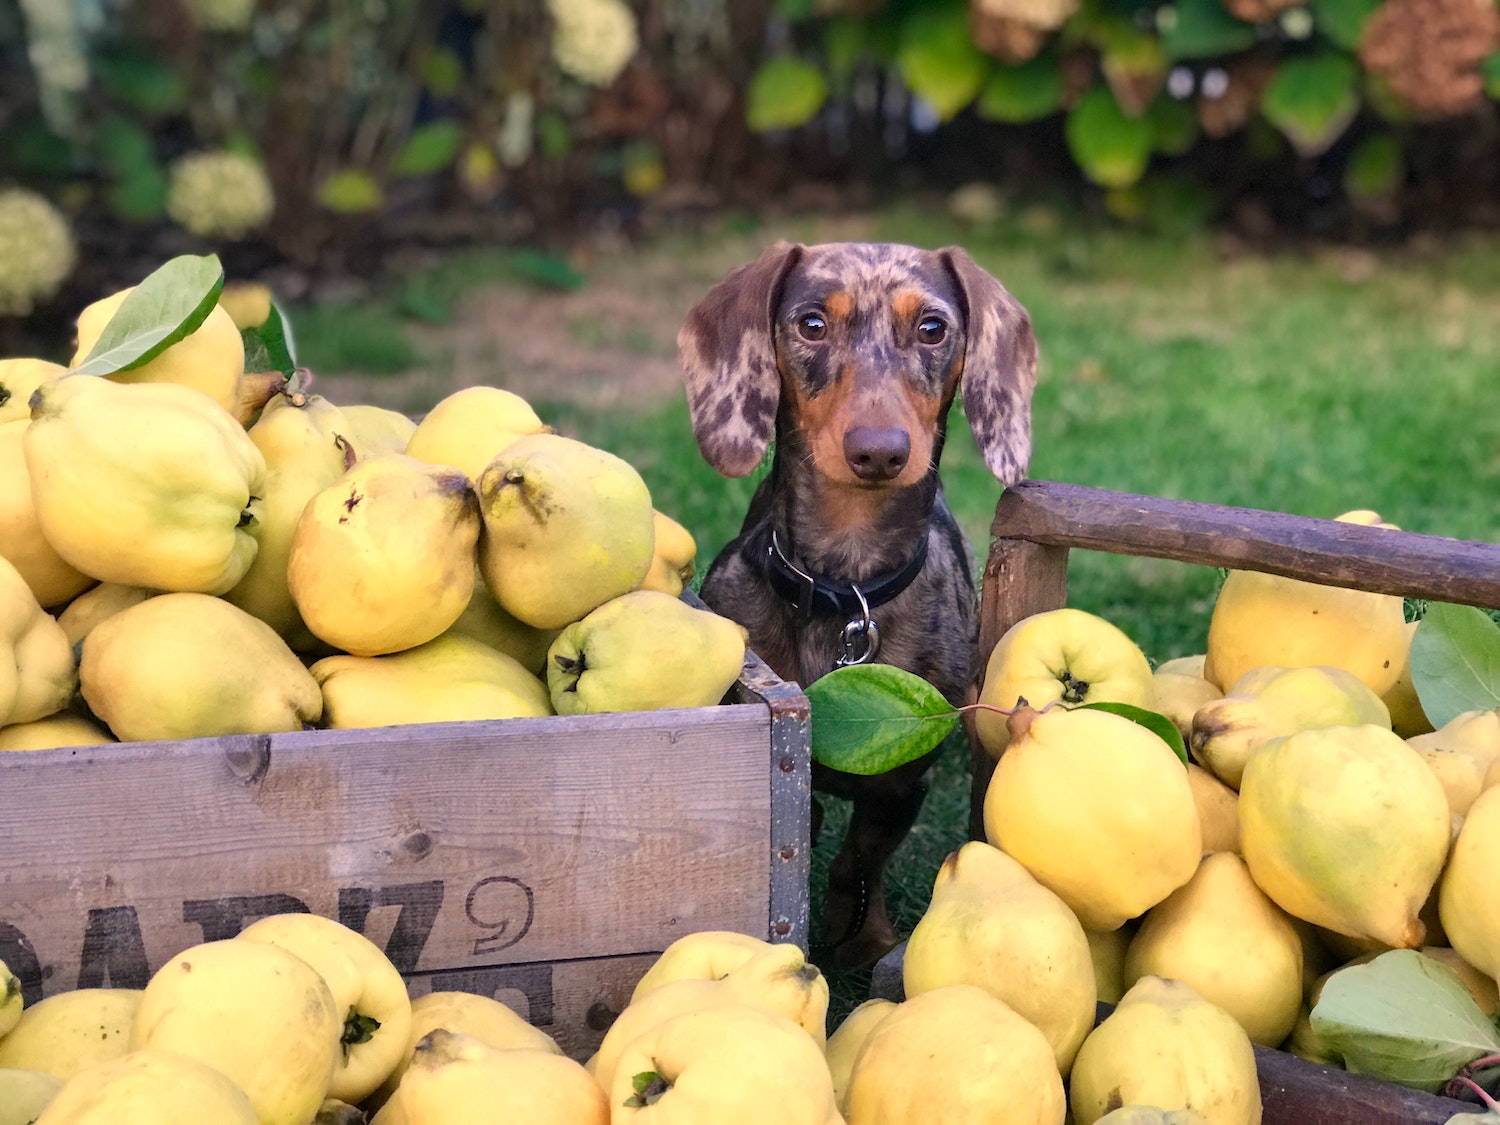 Top fruit and veg for your pup